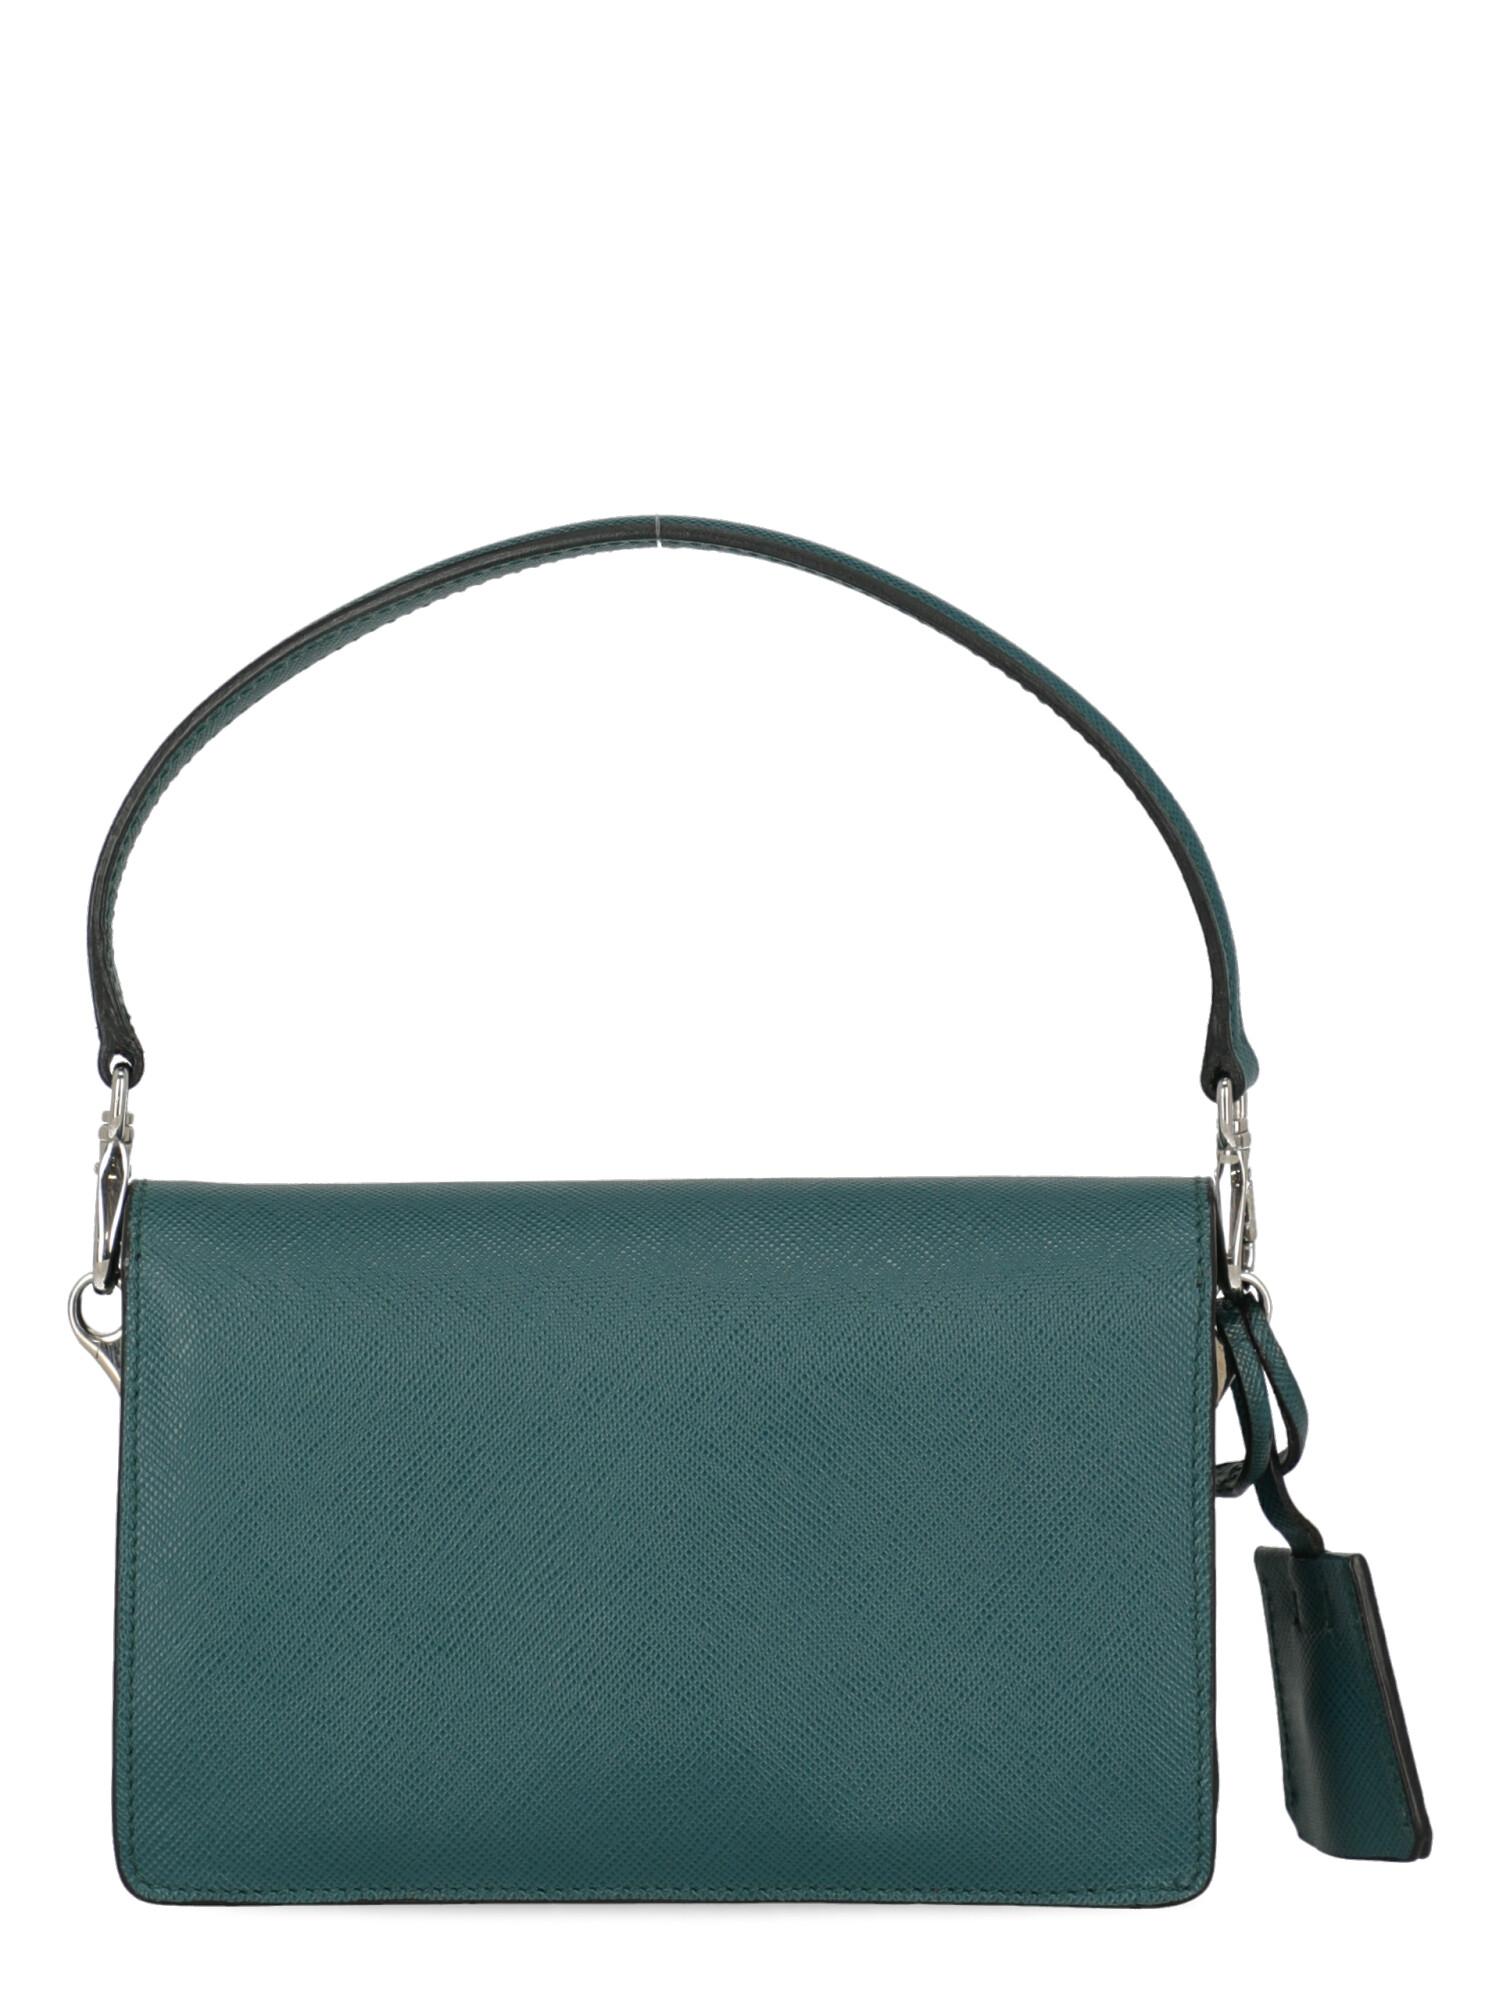 Prada Woman Shoulder bag Sound Green Leather In Good Condition For Sale In Milan, IT